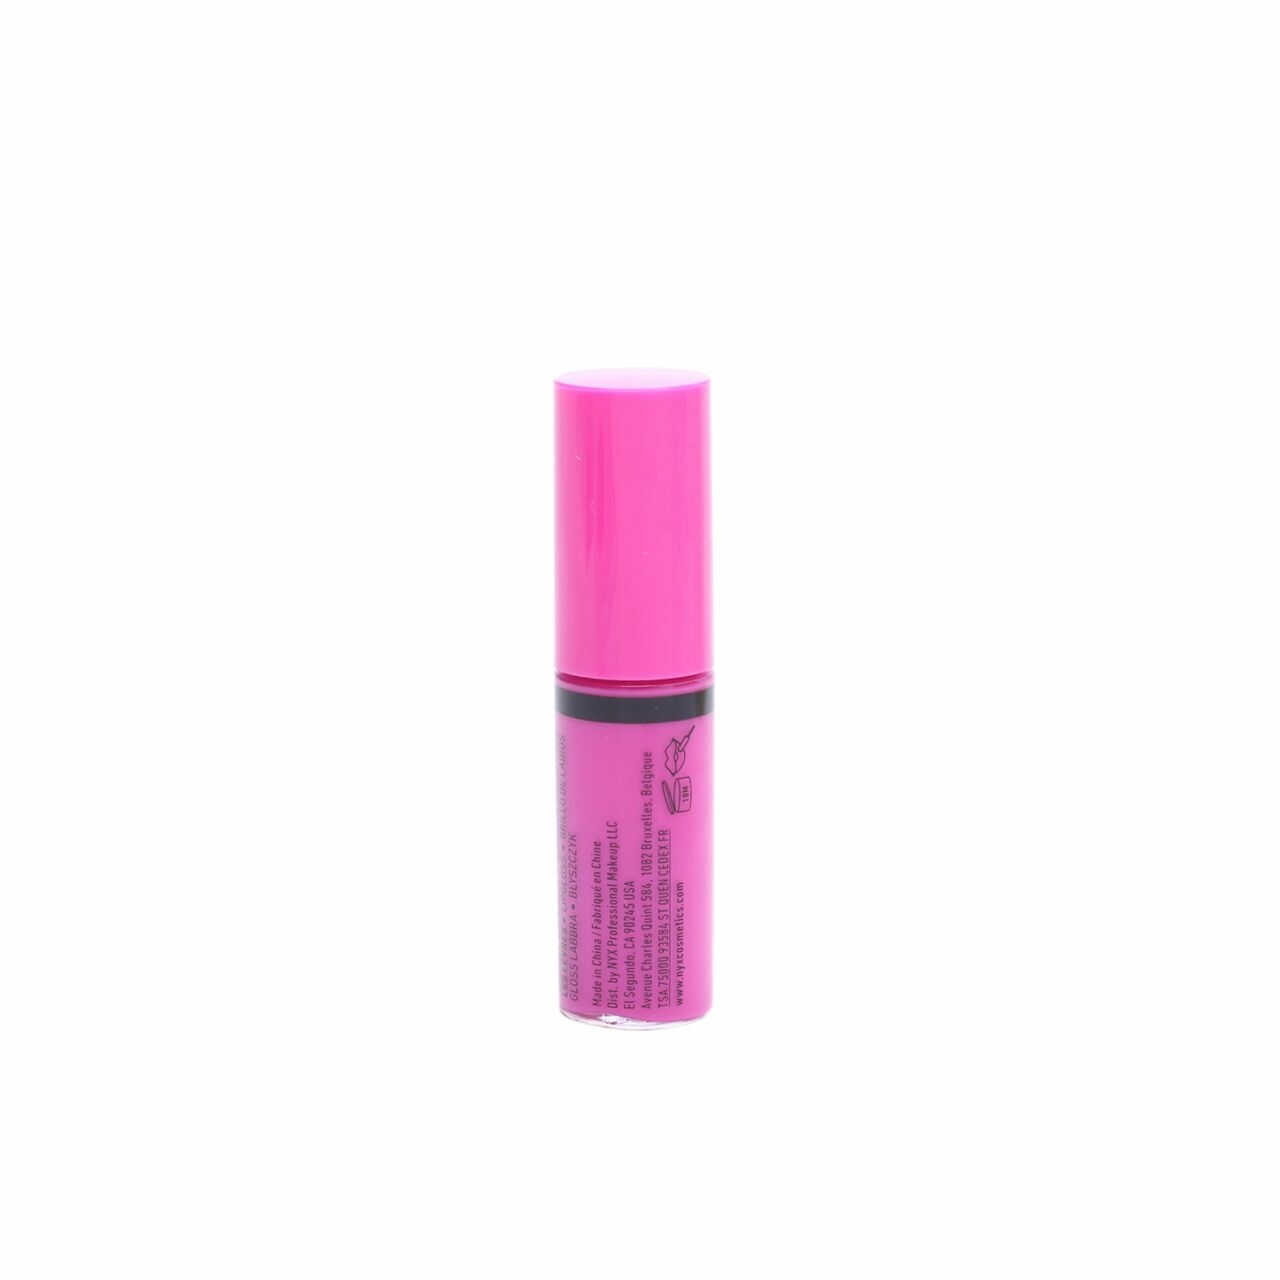 NYX Sugar Cookie Butter Gloss Lips